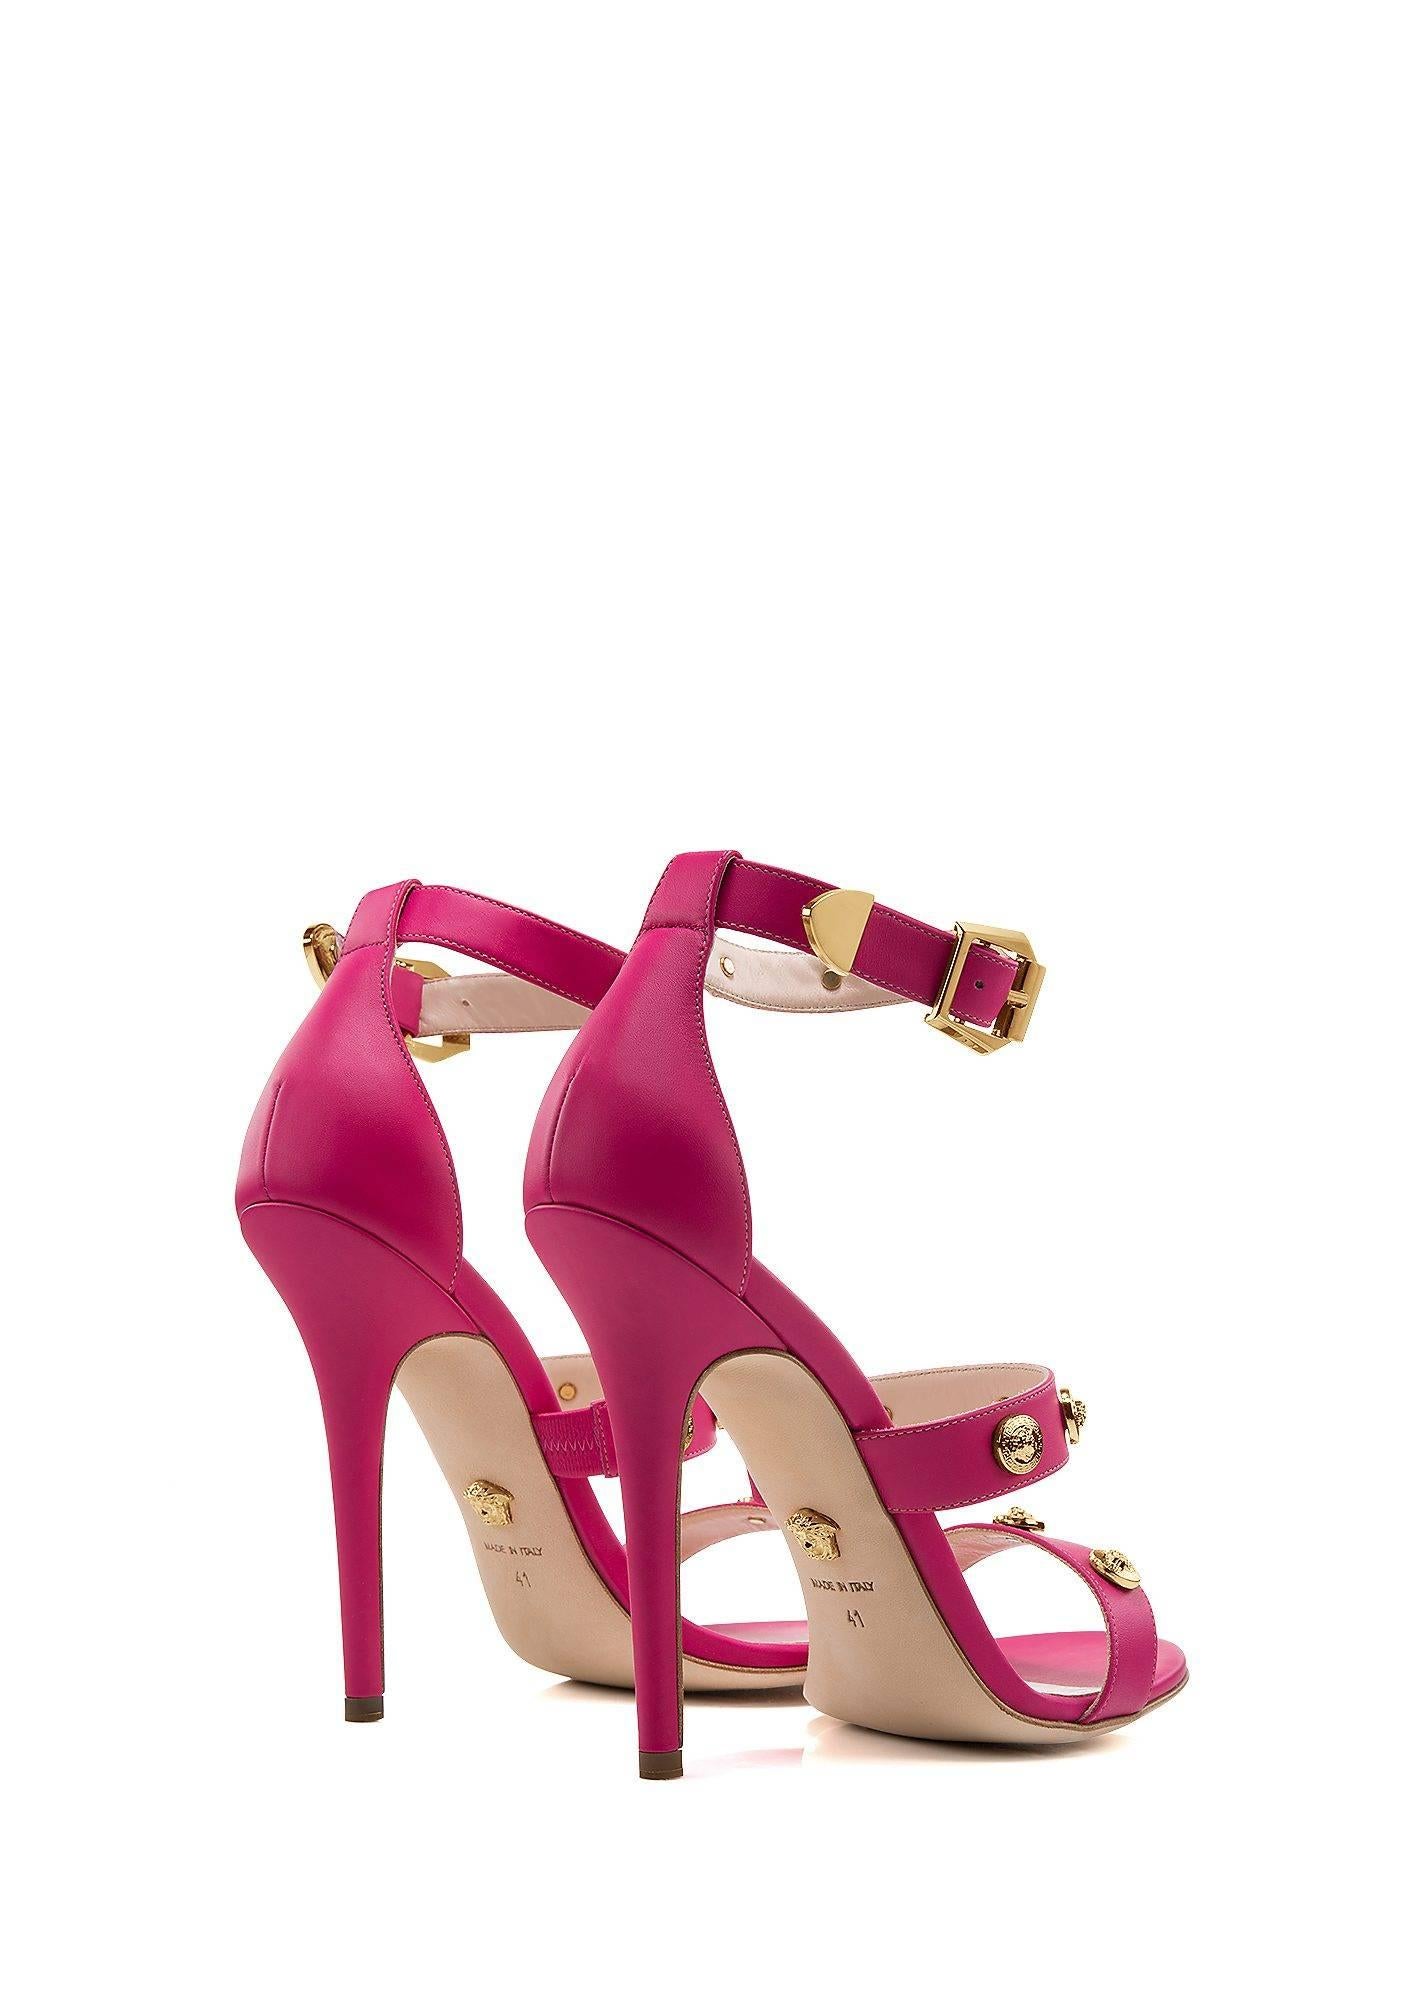 VERSACE SANDALS

Slip into these sandals to make a nice lasting impression at your next cocktail party.

Hot pink 